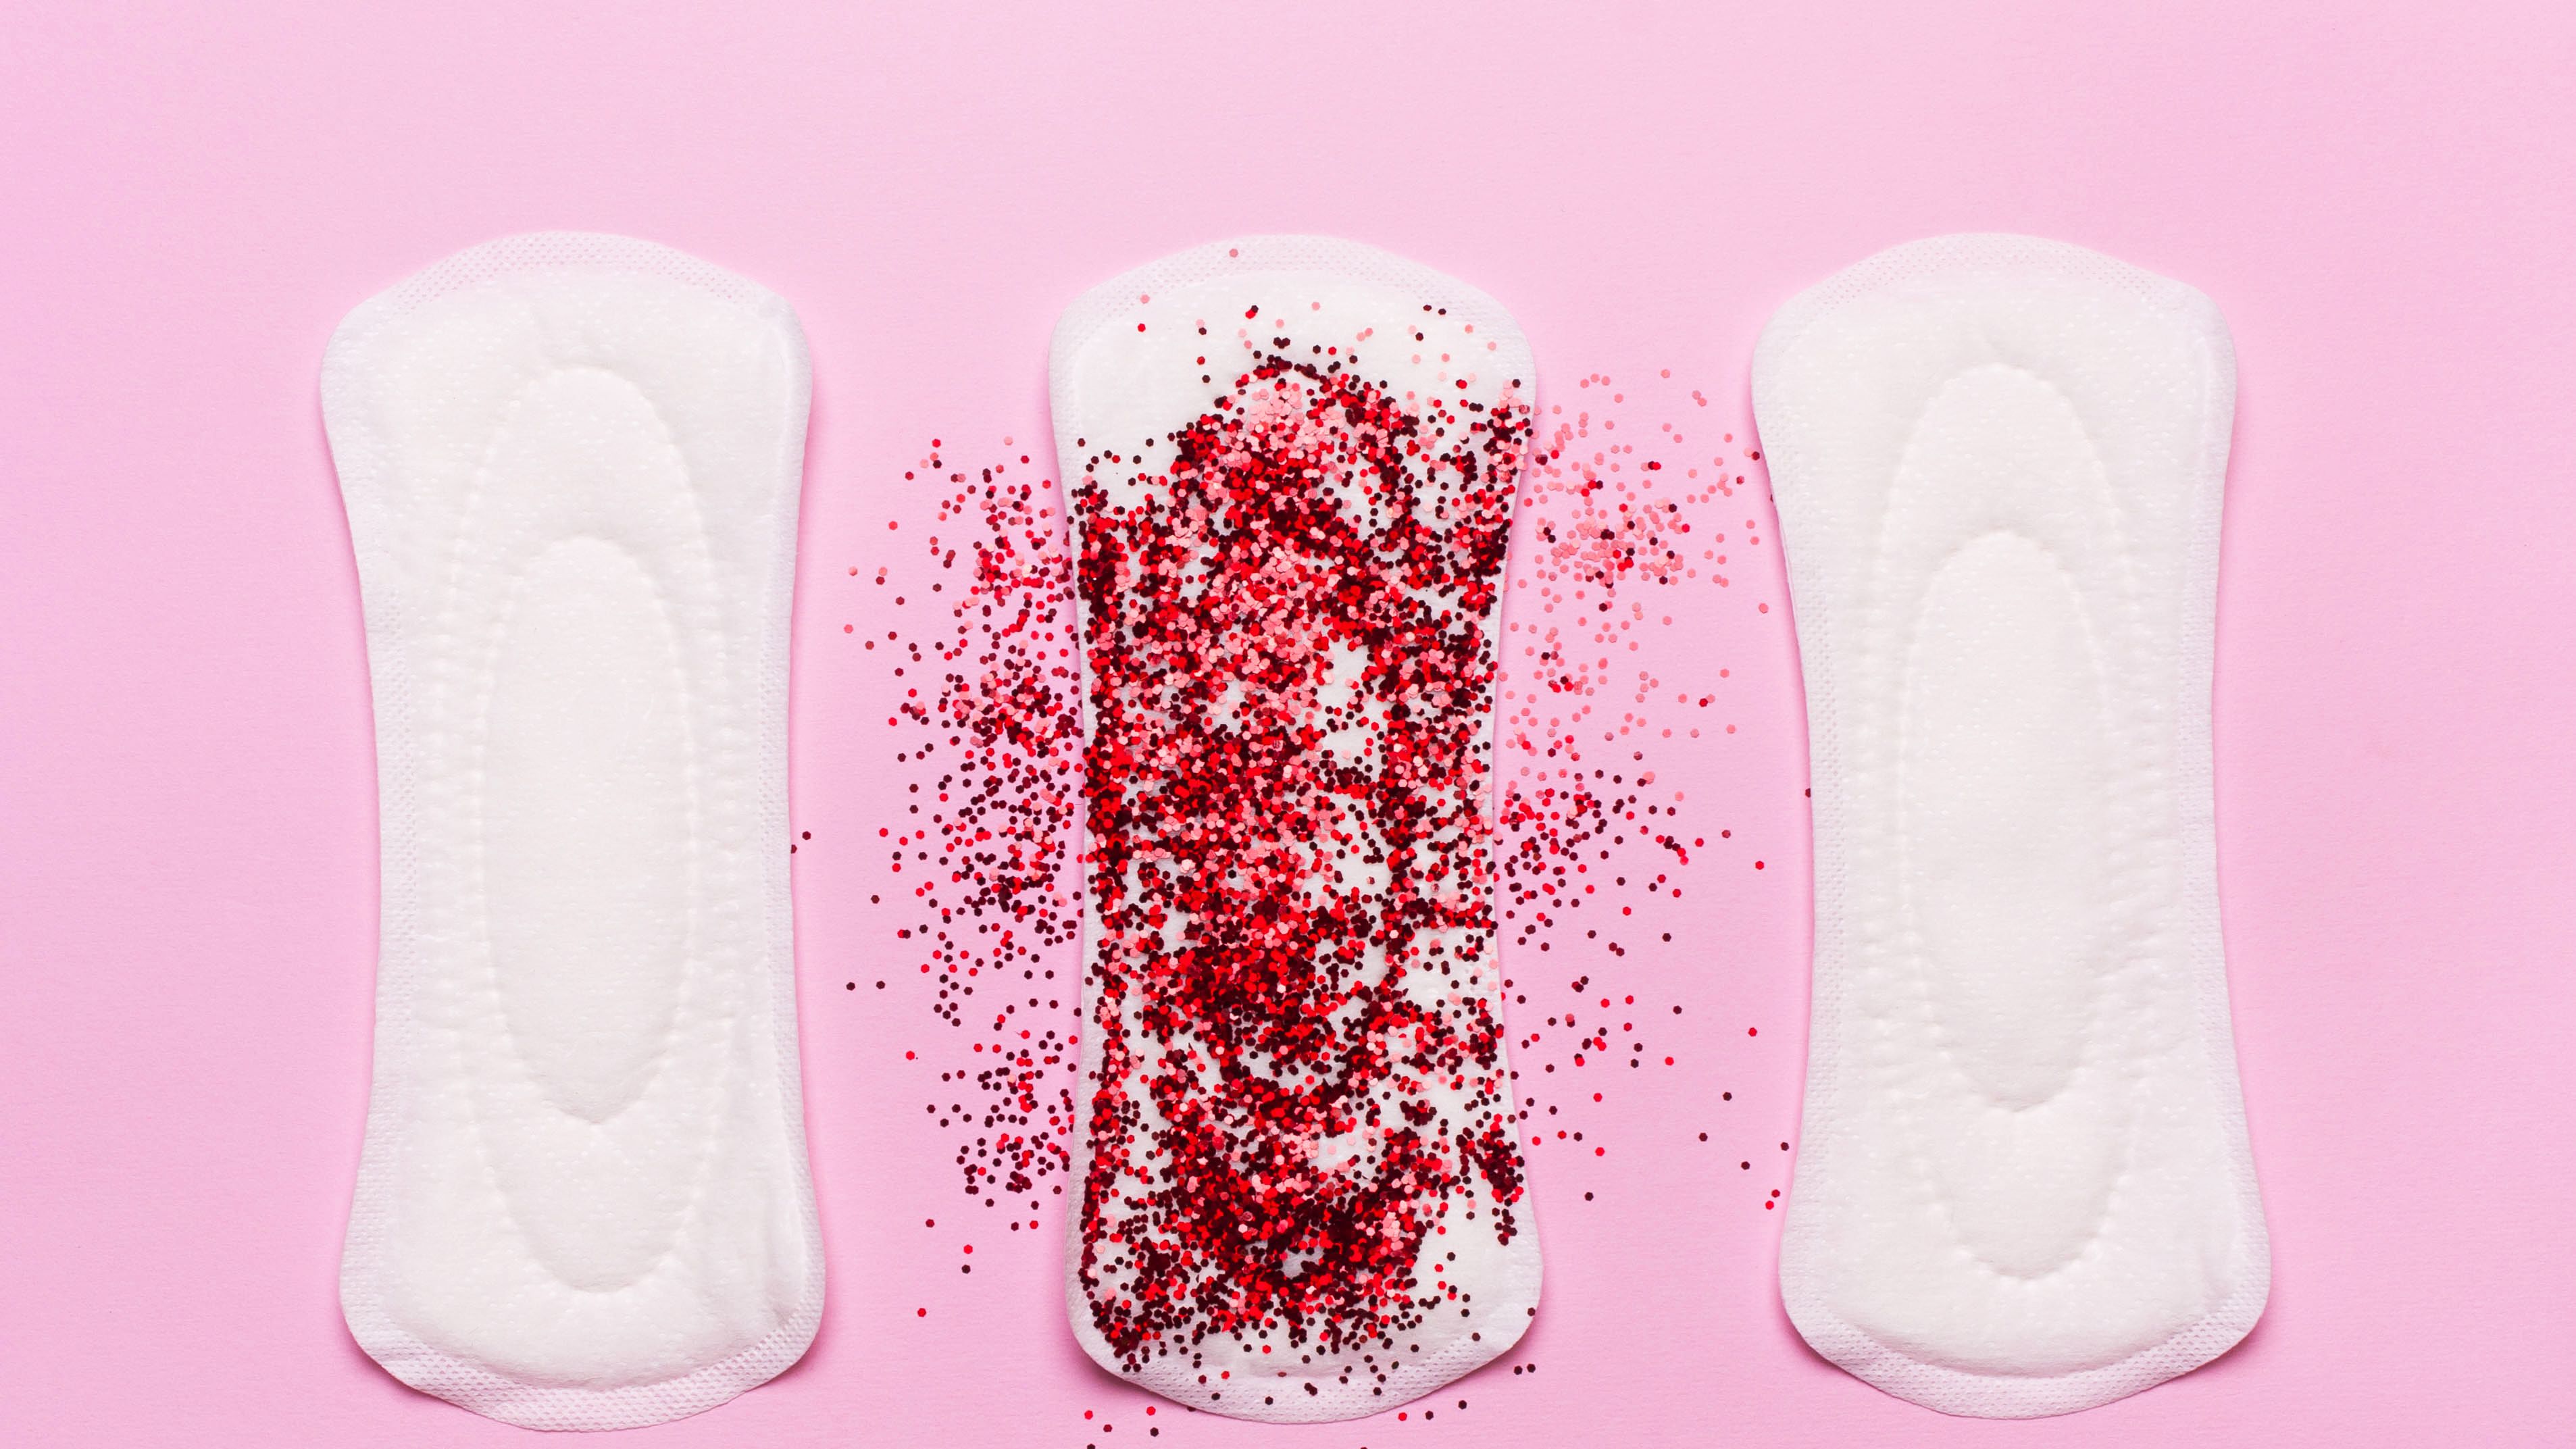 Turning Red' period talk shocked some parents. Why it shouldn't have.